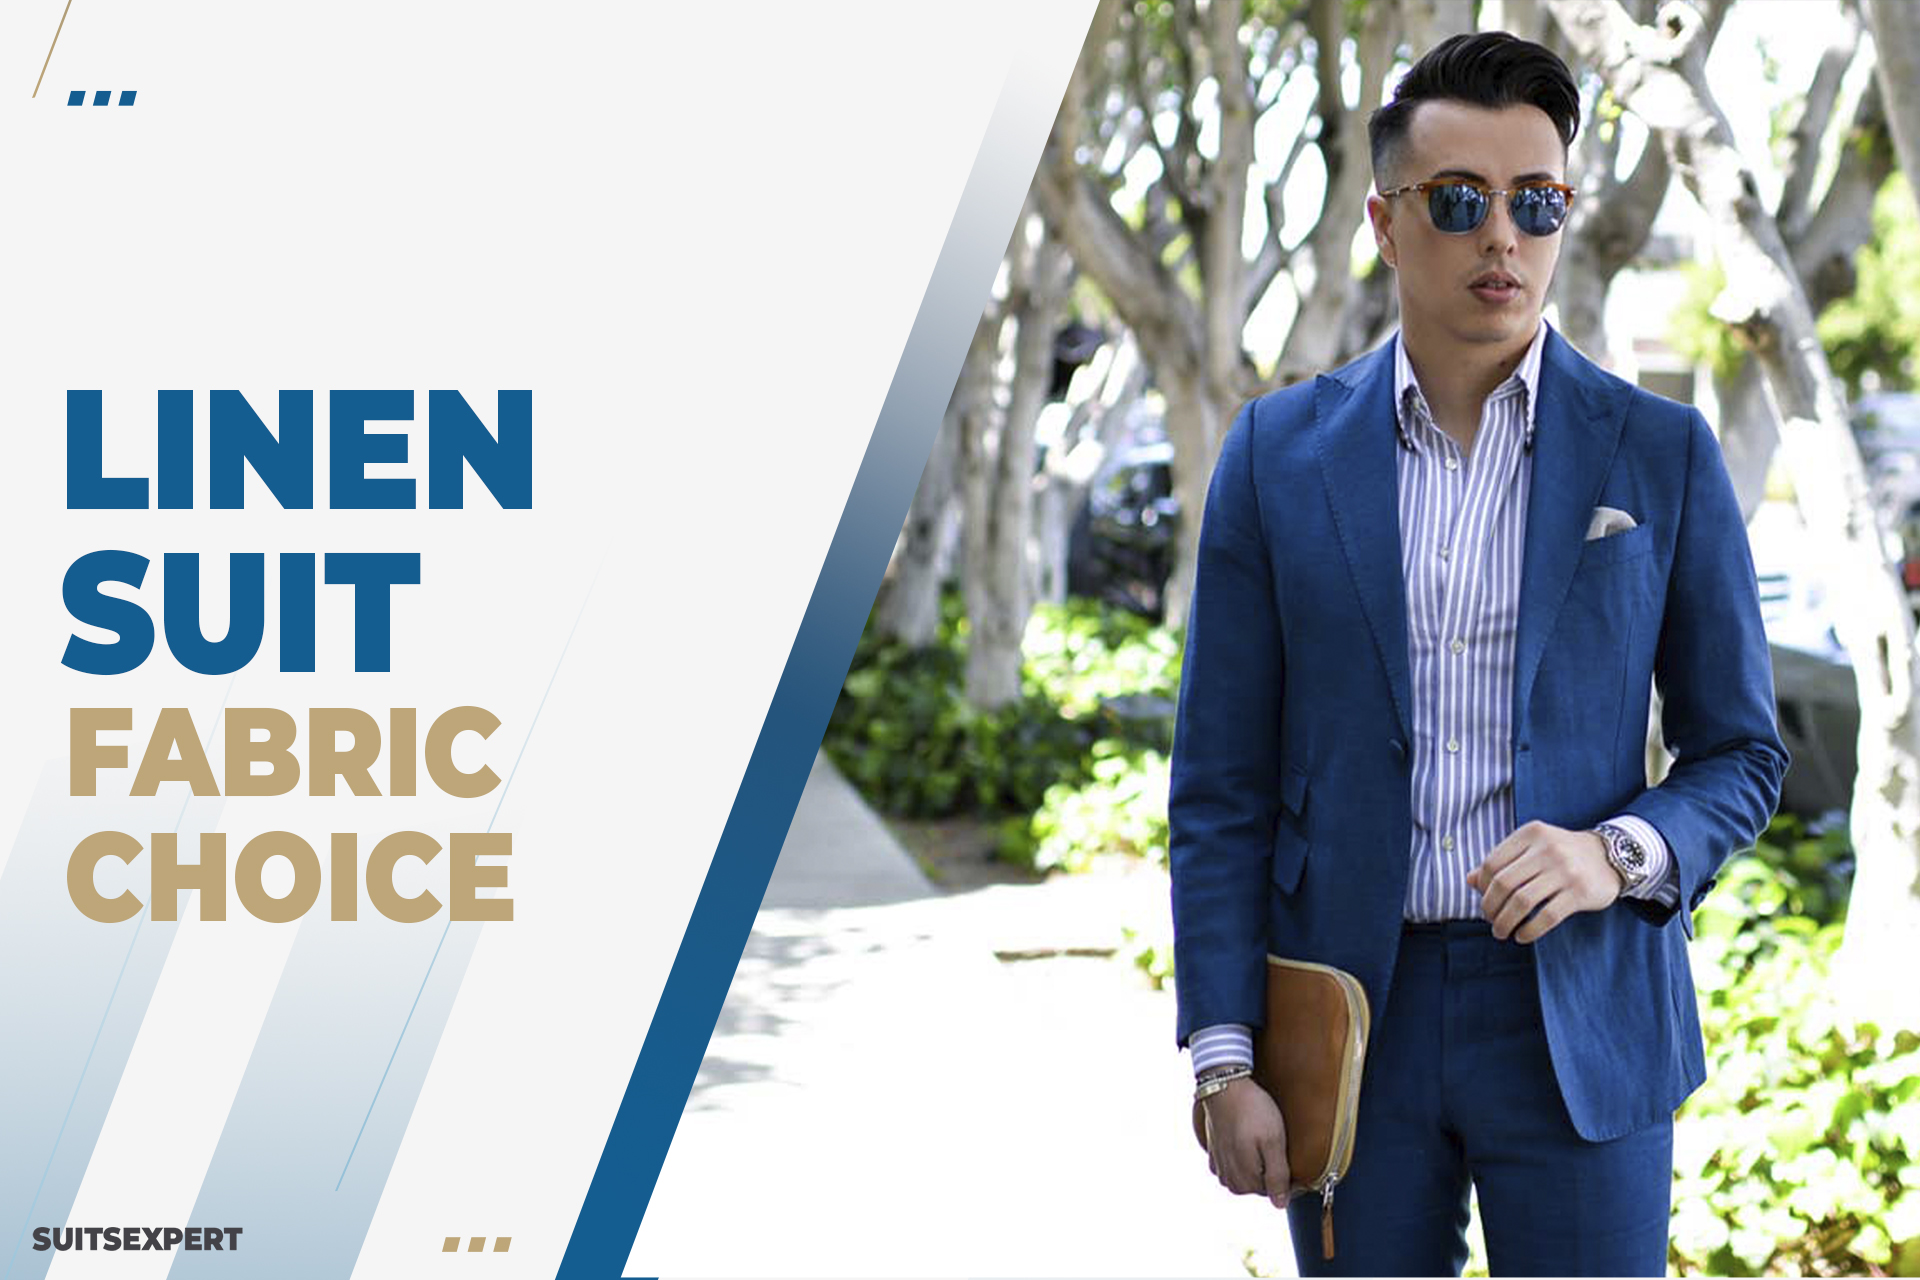 Best Linen Suits: Linen Suit Fabrics Guide For Summer & How To